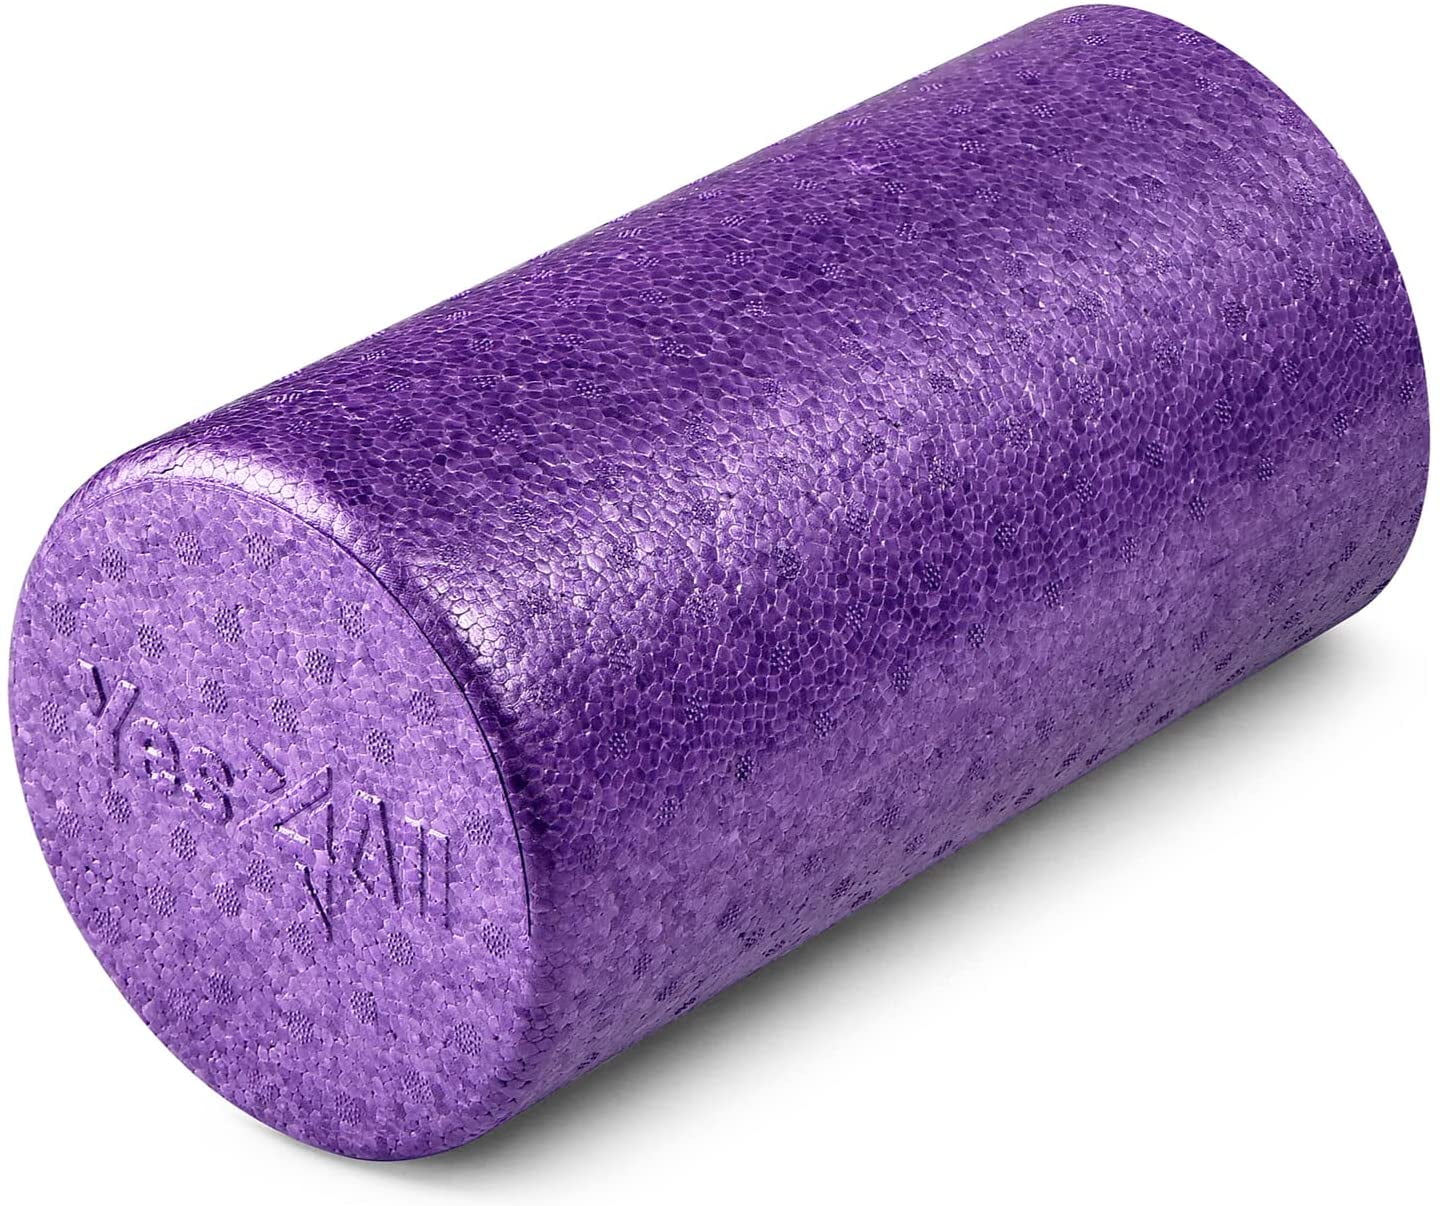 Yes4All EPP Exercise Foam Roller - Extra Firm High Density Foam Roller - Best for Flexibility and Rehab Exercises (12 inch, Purple)